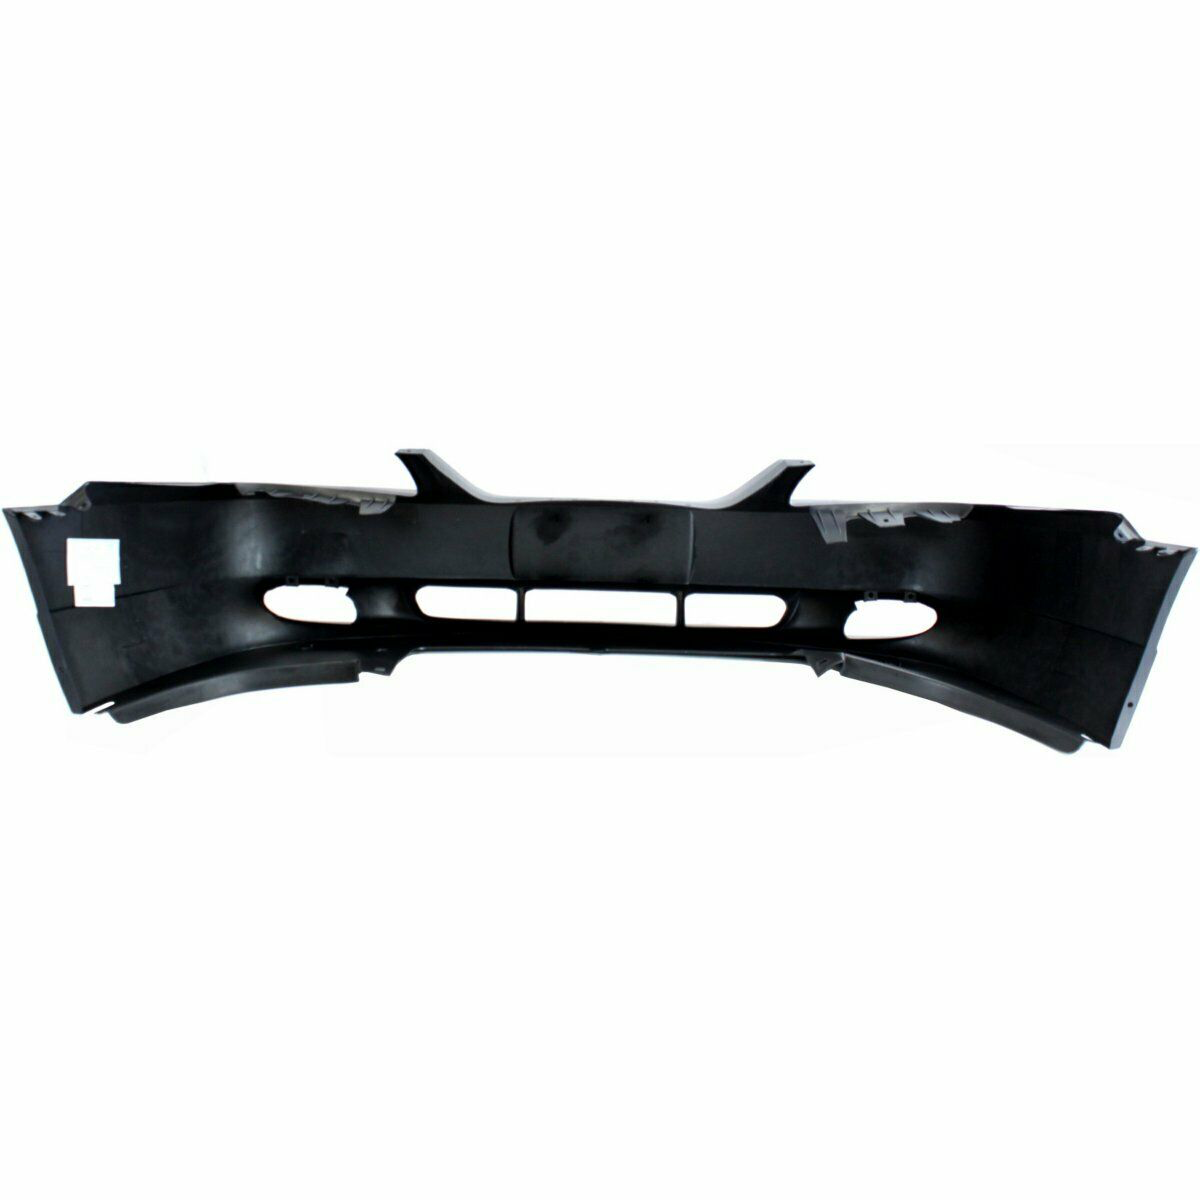 1999-2004 Ford Mustang GT Front Bumper Painted to Match